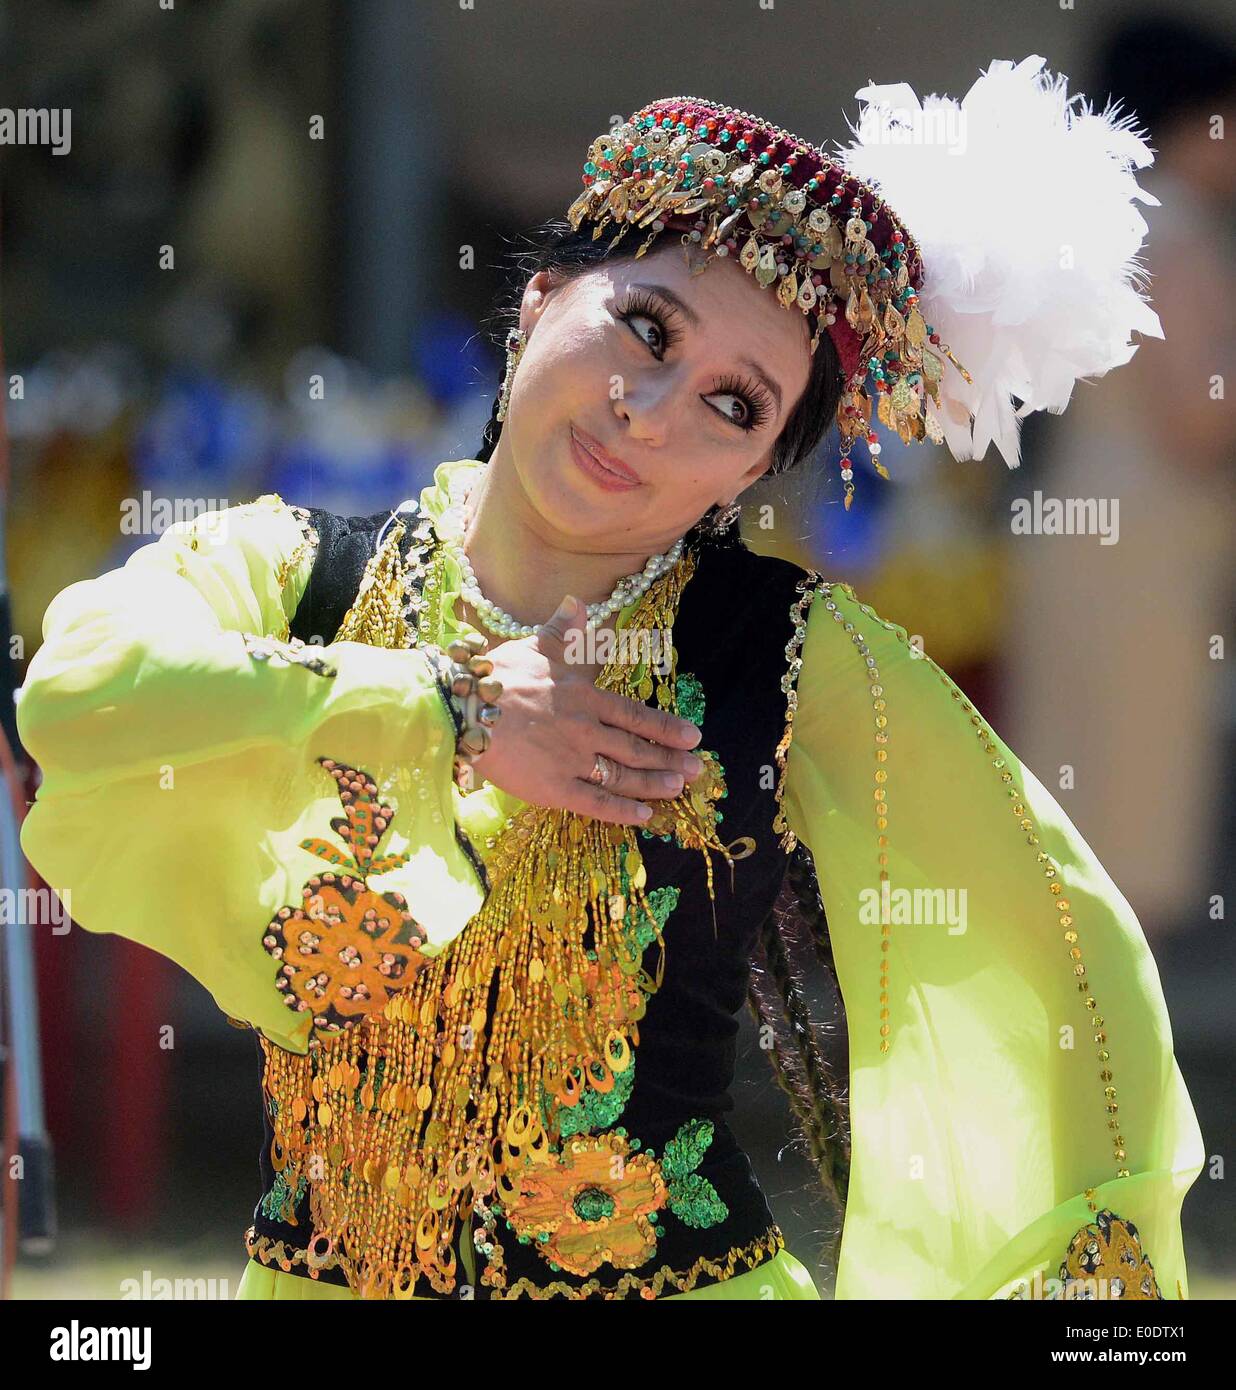 Tashkent, Uzbekistan. 10th May, 2014. A performer dances during the 12nd Uzbekistan foreign mission traditional culture and folk cuisine feast in Tashkent, Uzbekistan, May 10, 2014. The 12nd Uzbekistan foreign mission traditional culture and folk cuisine feast opened on Saturday. Credit:  Sadat/Xinhua/Alamy Live News Stock Photo